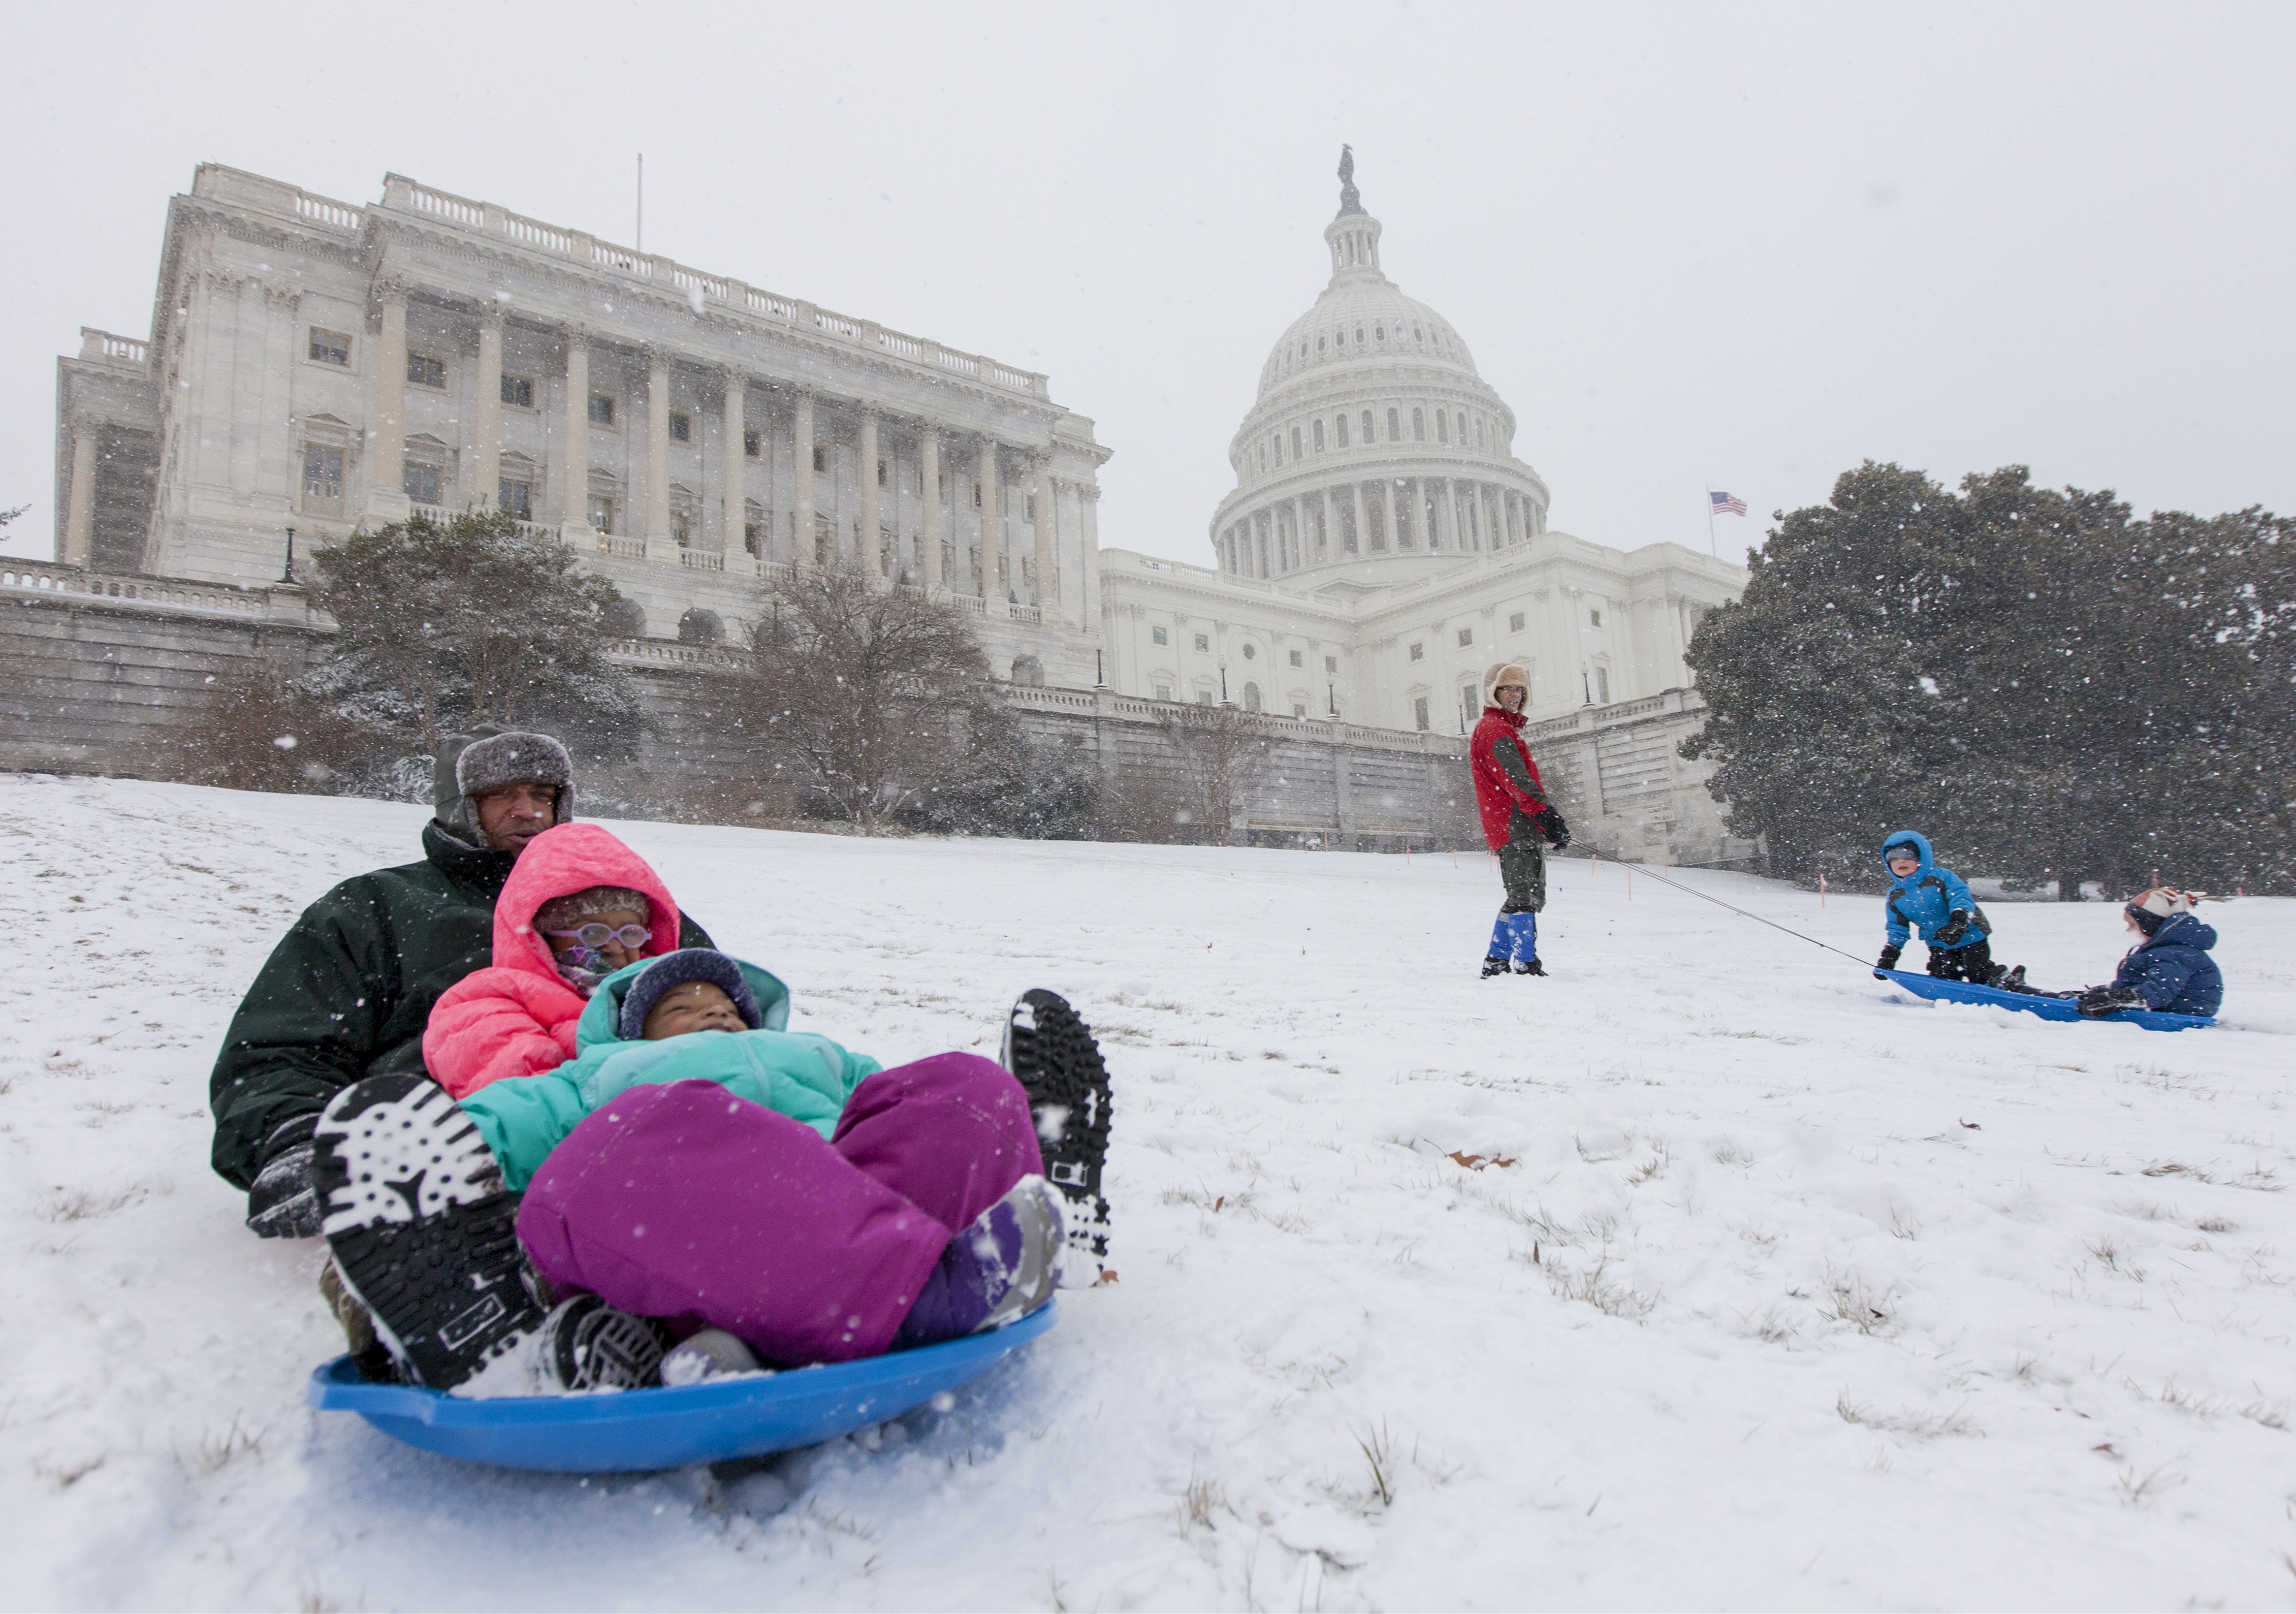 Will DC have a white Christmas this year?